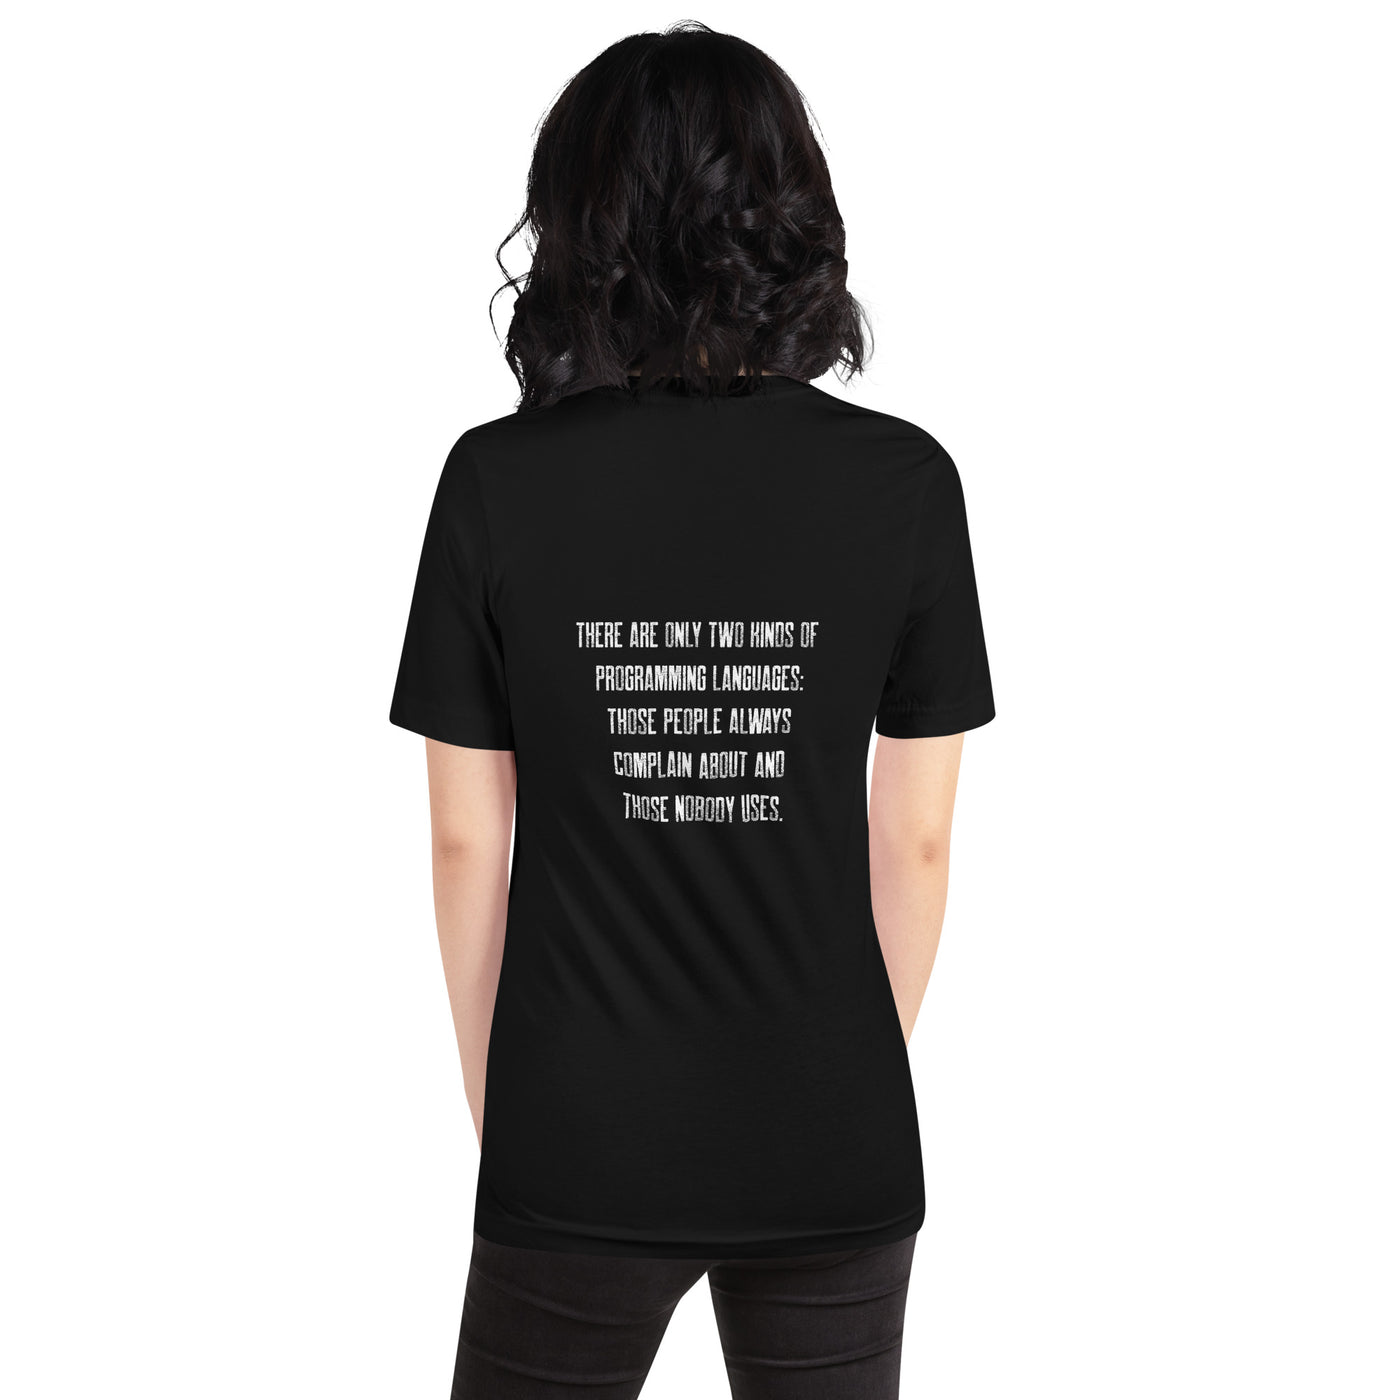 There are only two kinds of programming languages those people always complain about and those nobody uses V1 - Unisex t-shirt ( Back Print )